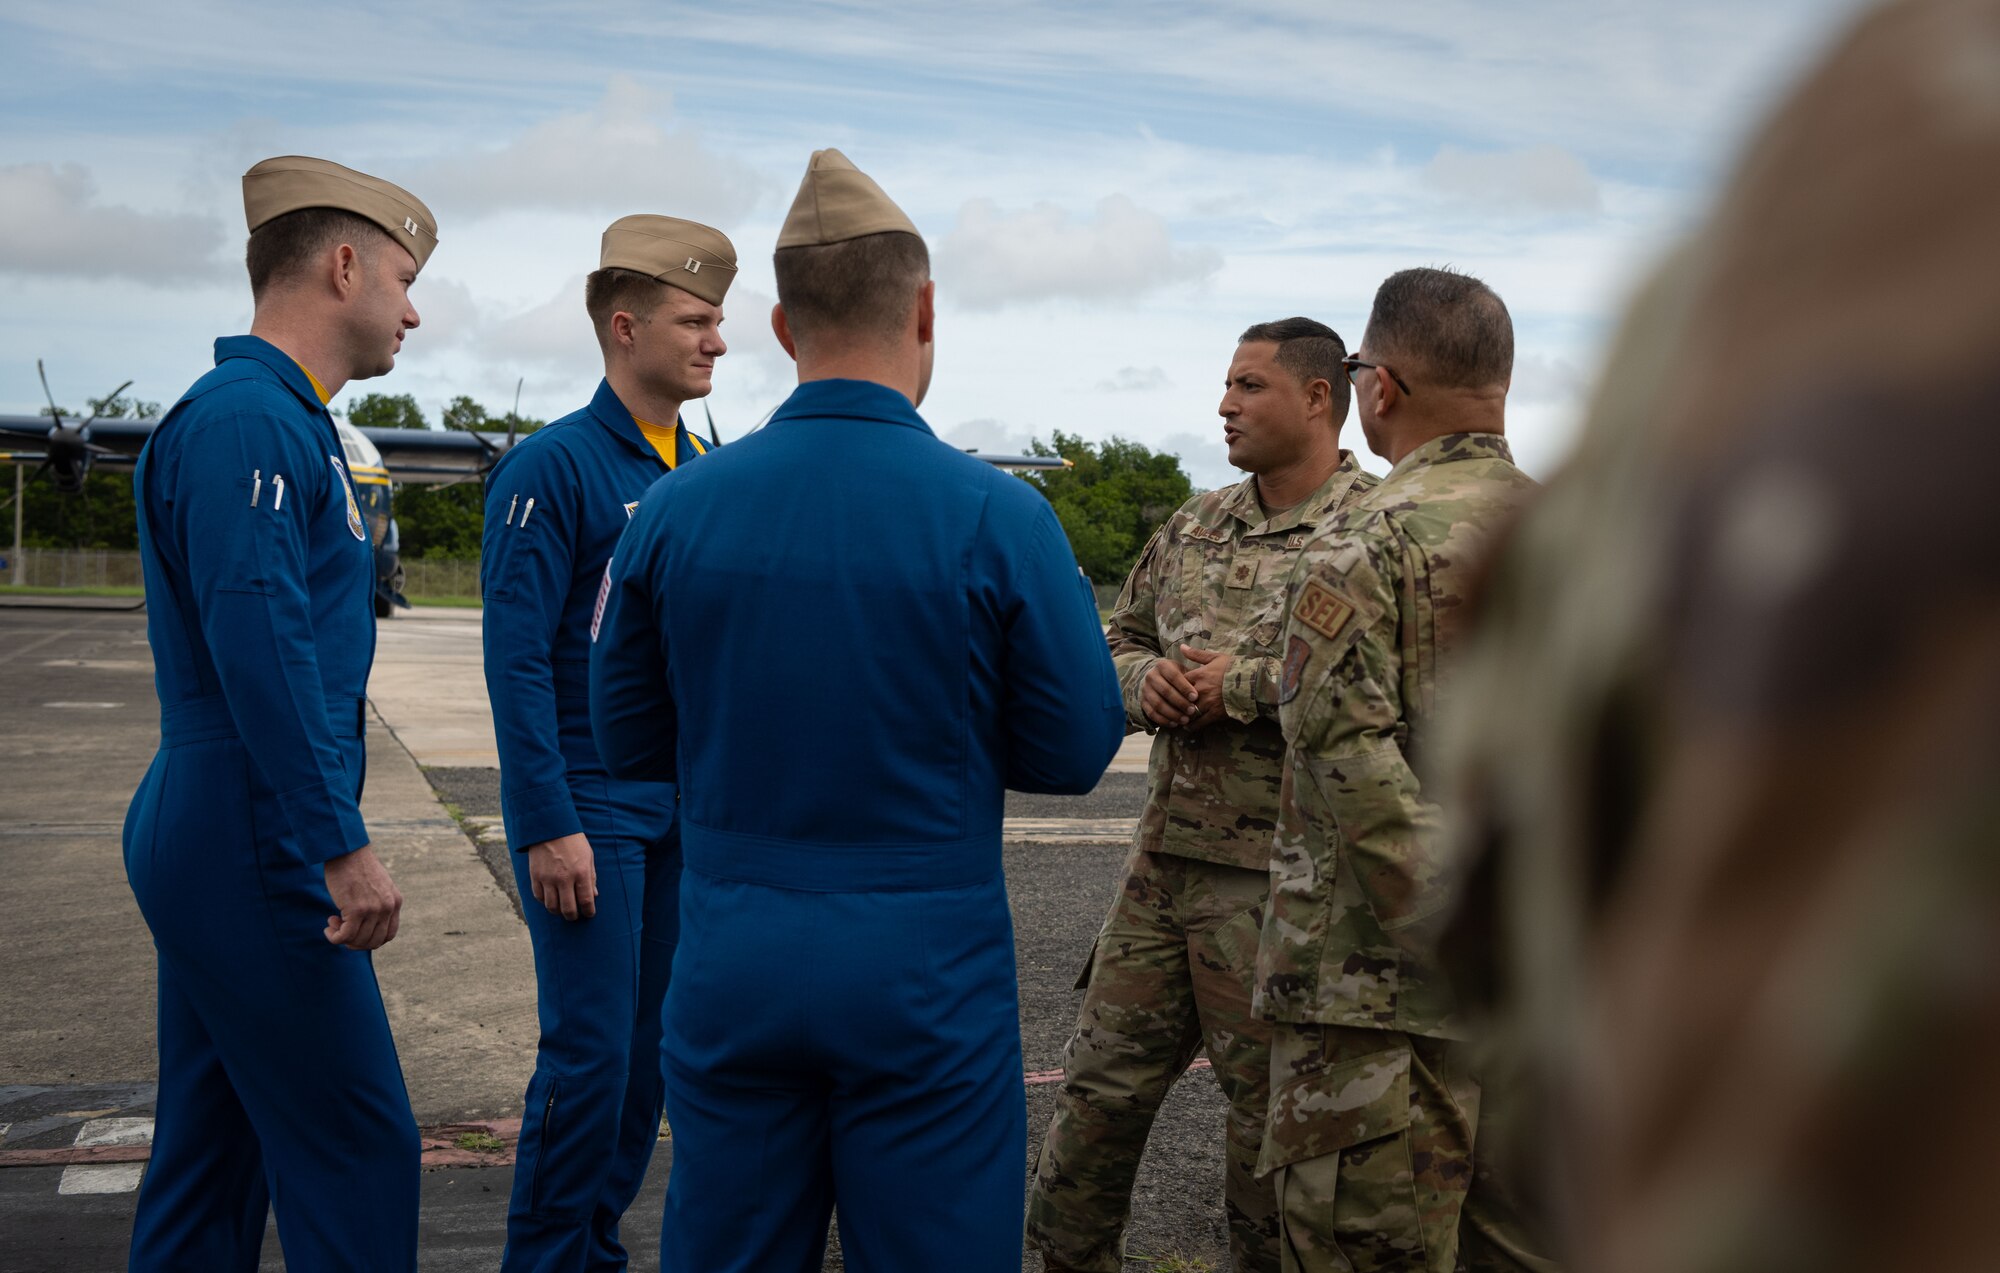 From right, U.S. Air Force Maj. Jesus Avilés, the 156th Wing plans officer, Puerto Rico Air National Guard, and Chief Master Sgt. Orlando Soto, the 156th Wing command chief, Puerto Rico Air National Guard, speak with U.S. Marine Corps officers with the U.S. Navy Flight Demonstration Squadron, the Blue Angels, at Muñiz Air National Guard Base, Carolina, Puerto Rico, Dec. 15, 2023. The Puerto Rico Air National Guard supported the U.S. Navy Blue Angels in a campaign with Toys for Tots, which impacted communities across the Island in an effort to distribute more than 25,000 toys to local children during the holiday season. (U.S. Air National Guard photo by 2nd Lt. Eliezer Soto)